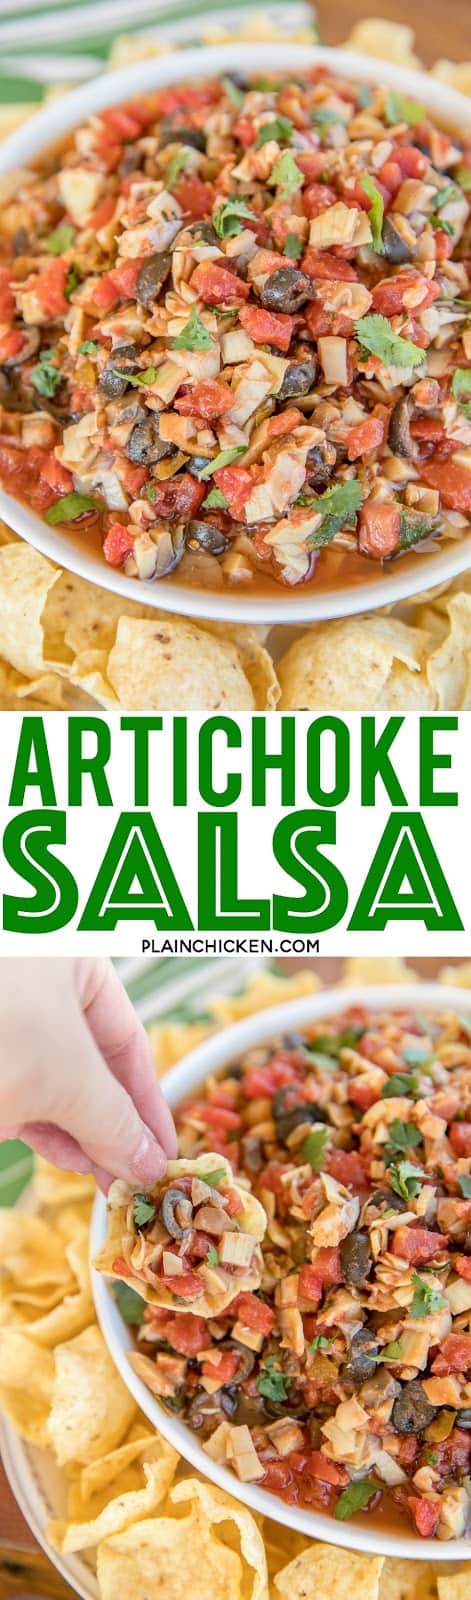 Artichoke Salsa - CRAZY good!! Artichokes, diced tomatoes and green chiles, mushrooms, black olives, red wine vinegar, cilantro, garlic slat and hot sauce. Serve with chips or spoon over grilled chicken. I took this to a dinner party and there were no leftovers! Everyone asked for the recipe!! A big hit! #salsa #veggies #dip #partyfood